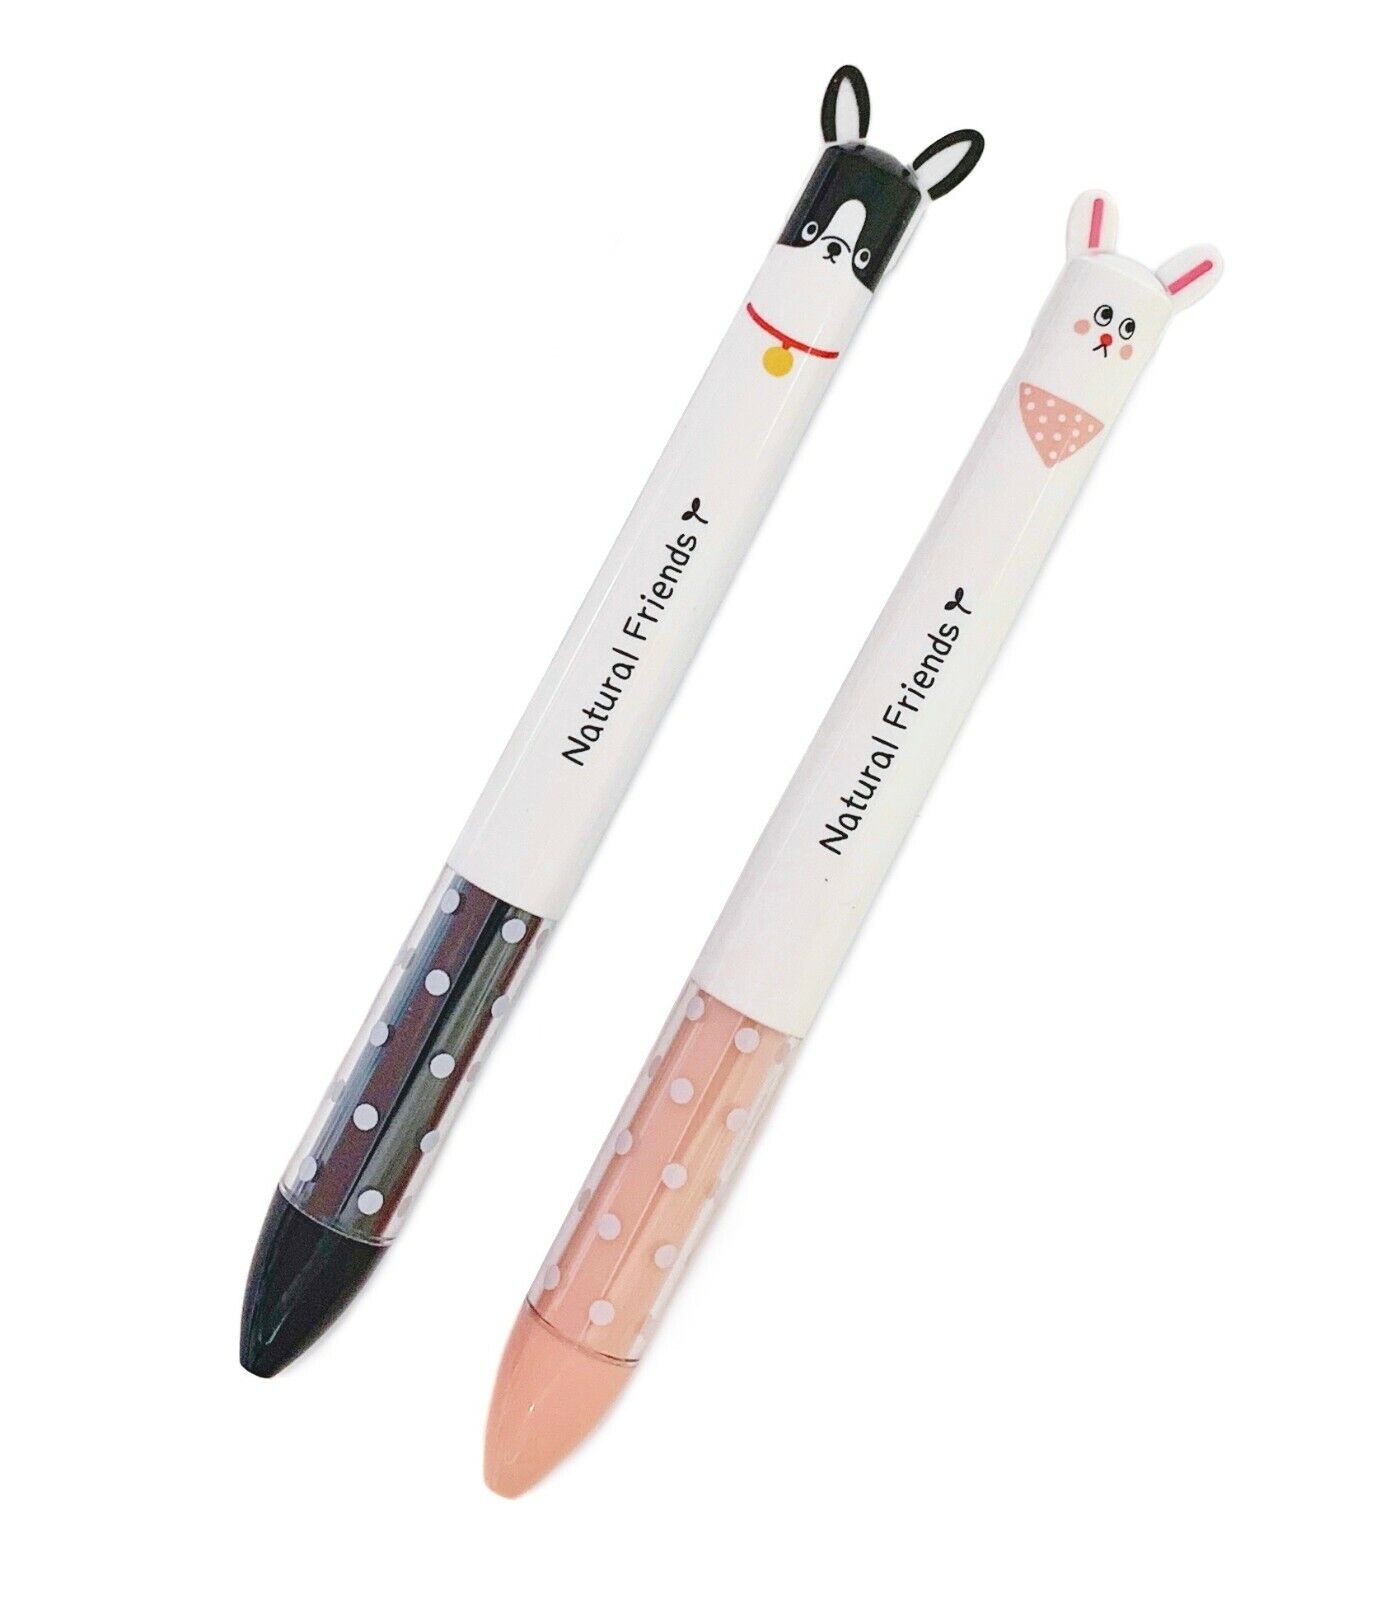 2pcs Daiso Dog & Rabbit 2 Colors Ballpoint Pen Black & Red Ink w/ tracking no.